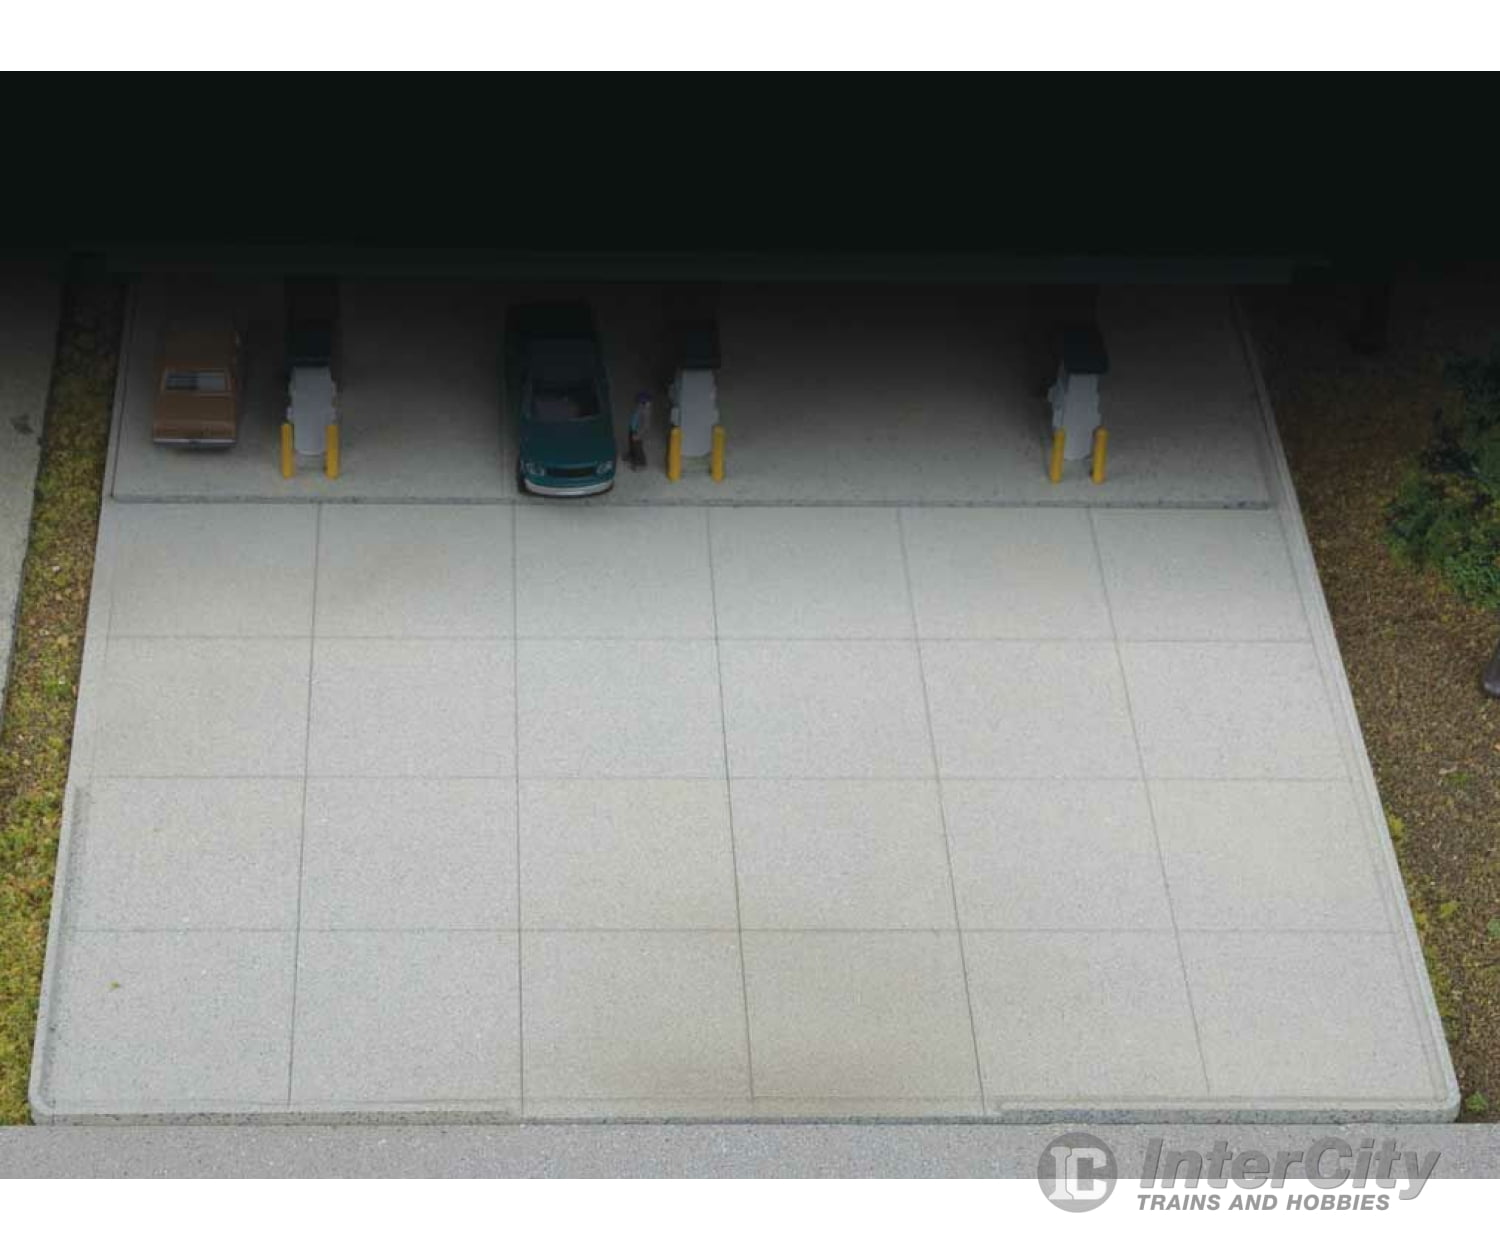 Walthers Cornerstone 3886 Modern Parking Lot - 8 Sections - - Kit Each Section: 5 - 3/4 X 2 -